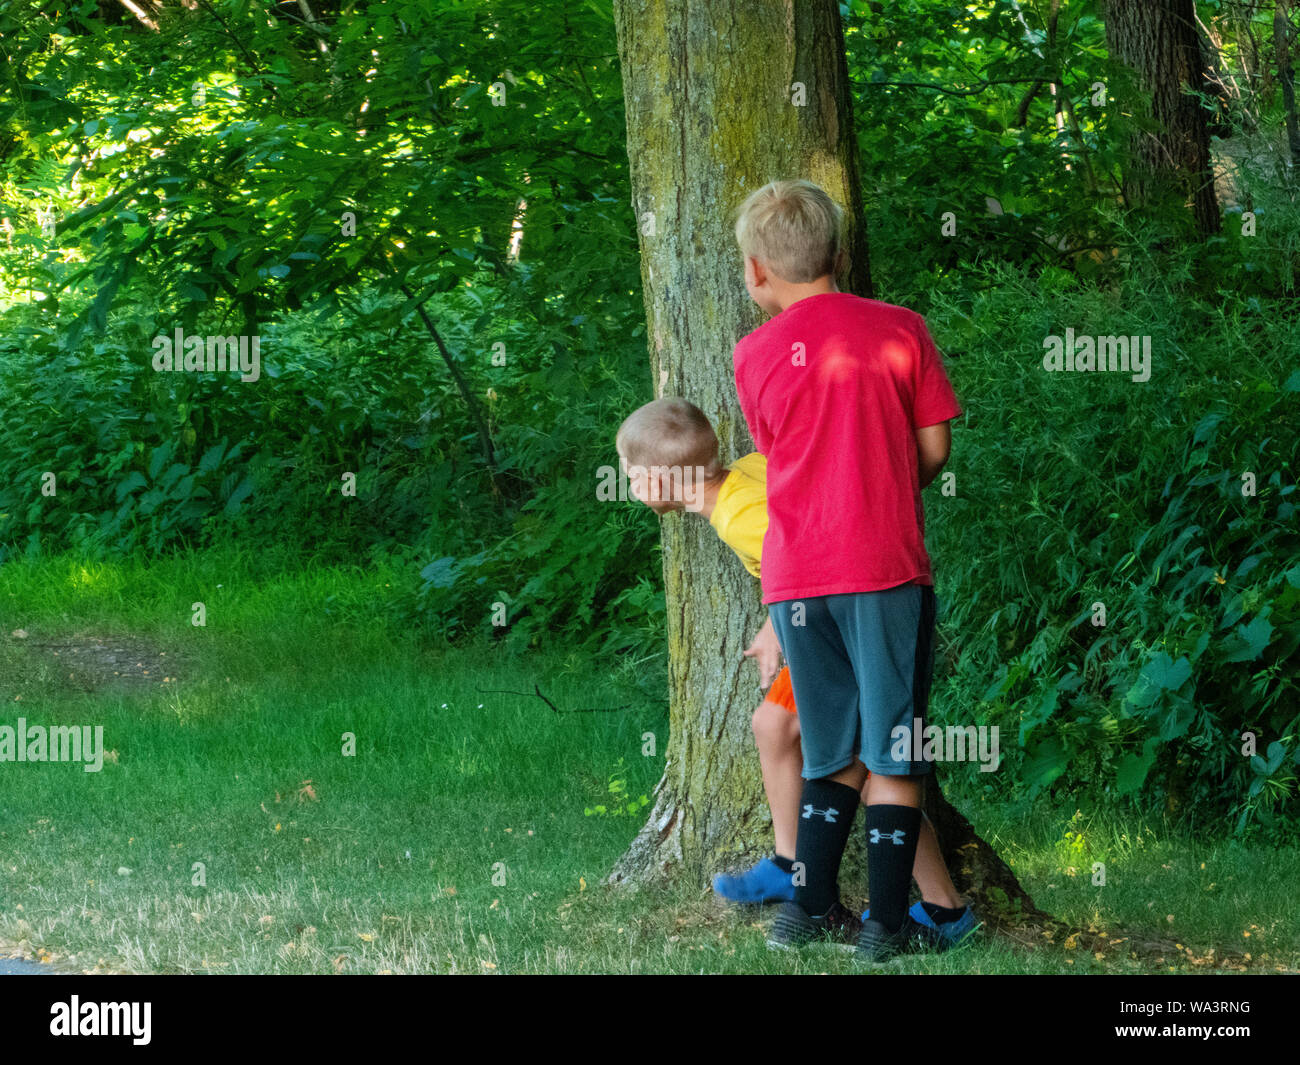 Boys playing hide and seek. Stock Photo